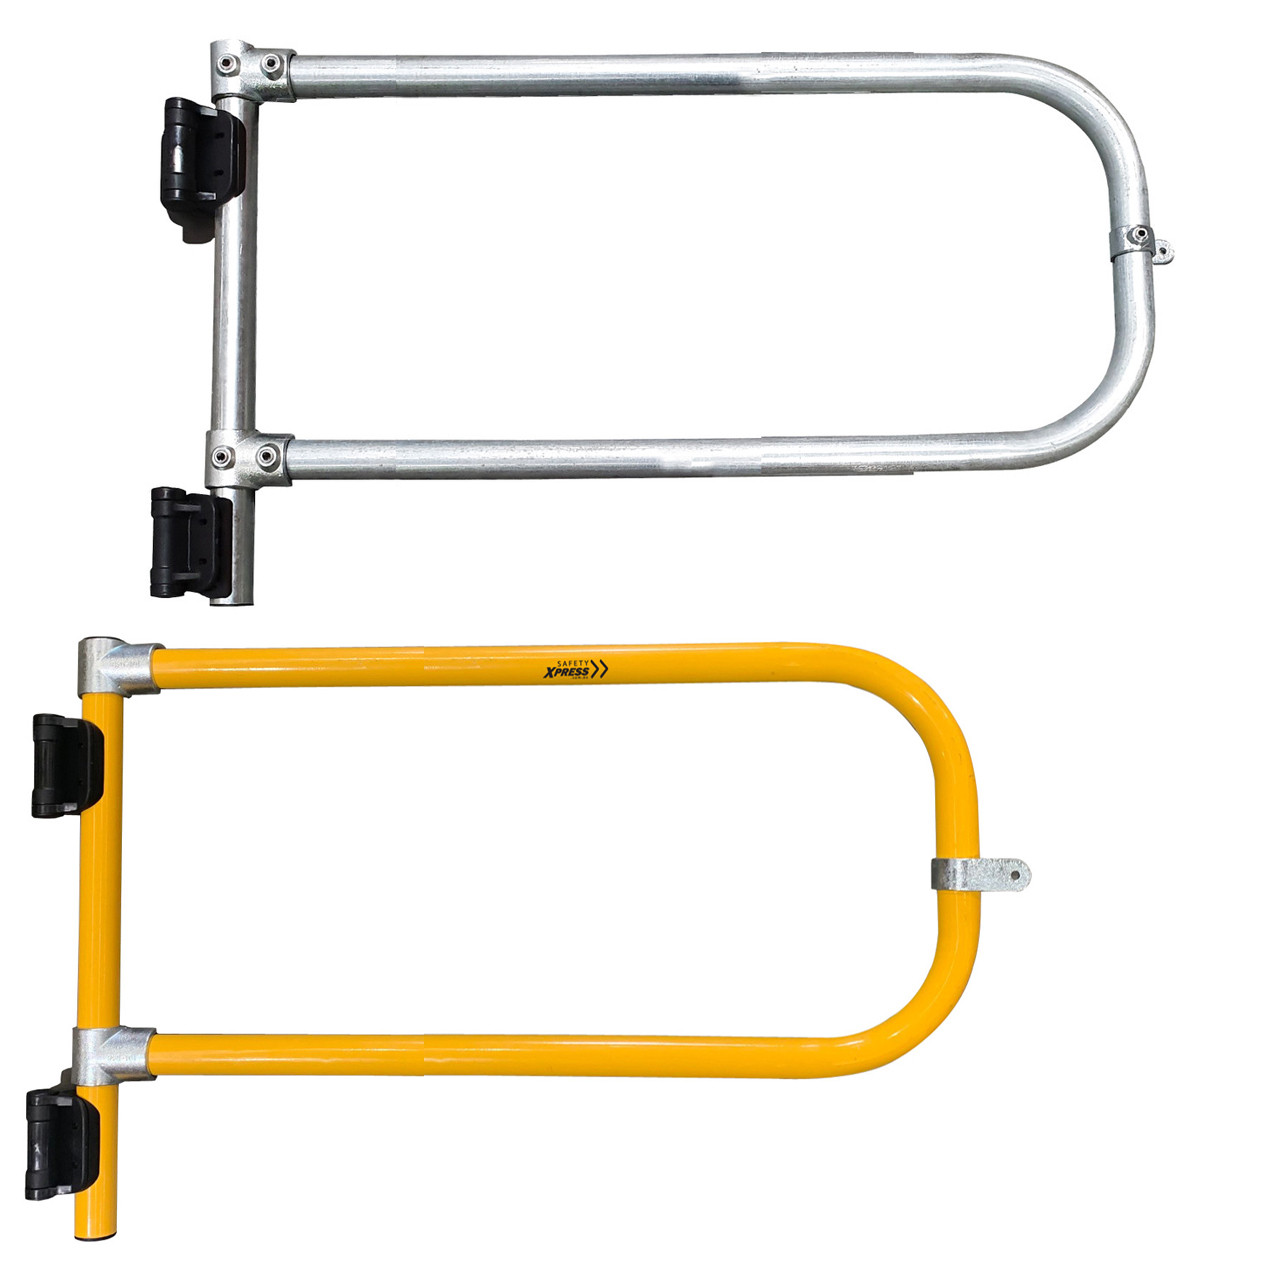 Ezyrail - Self Closing Gate 1200mm Galvanised OR Yellow - Safety Xpress